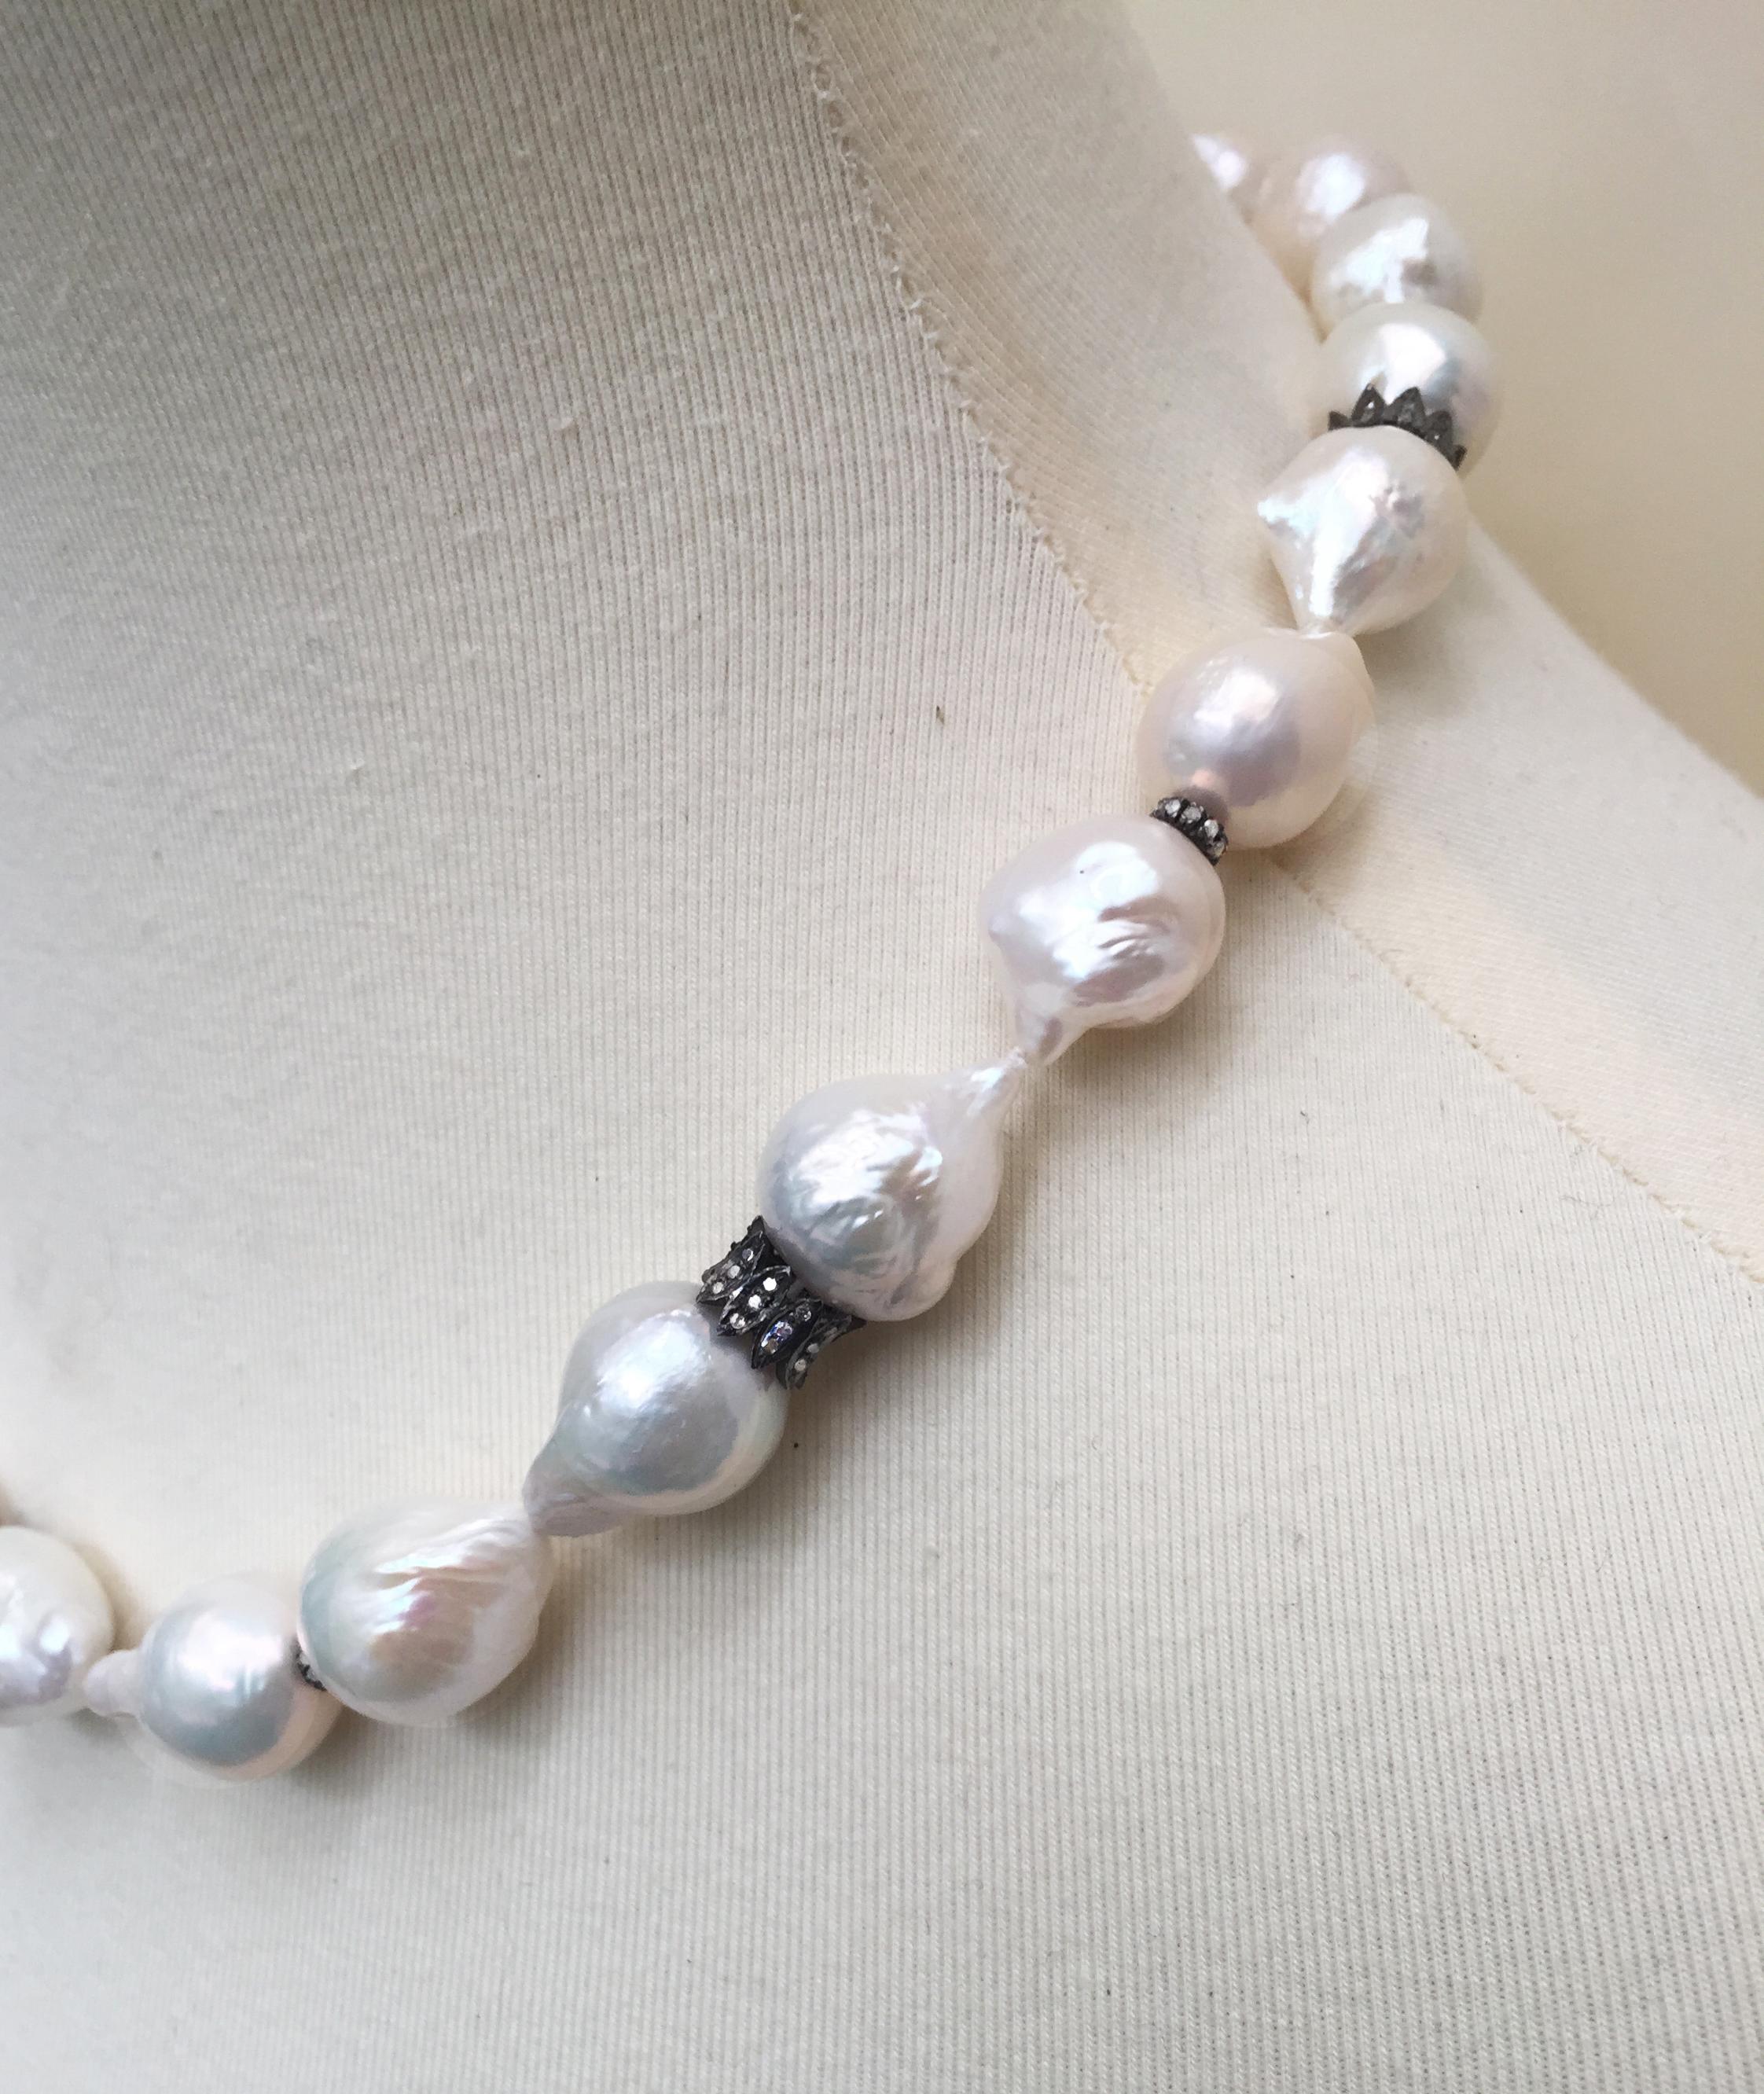 Artist Large Baroque White Pearl Necklace with Diamond and Oxidite Silver Dividers